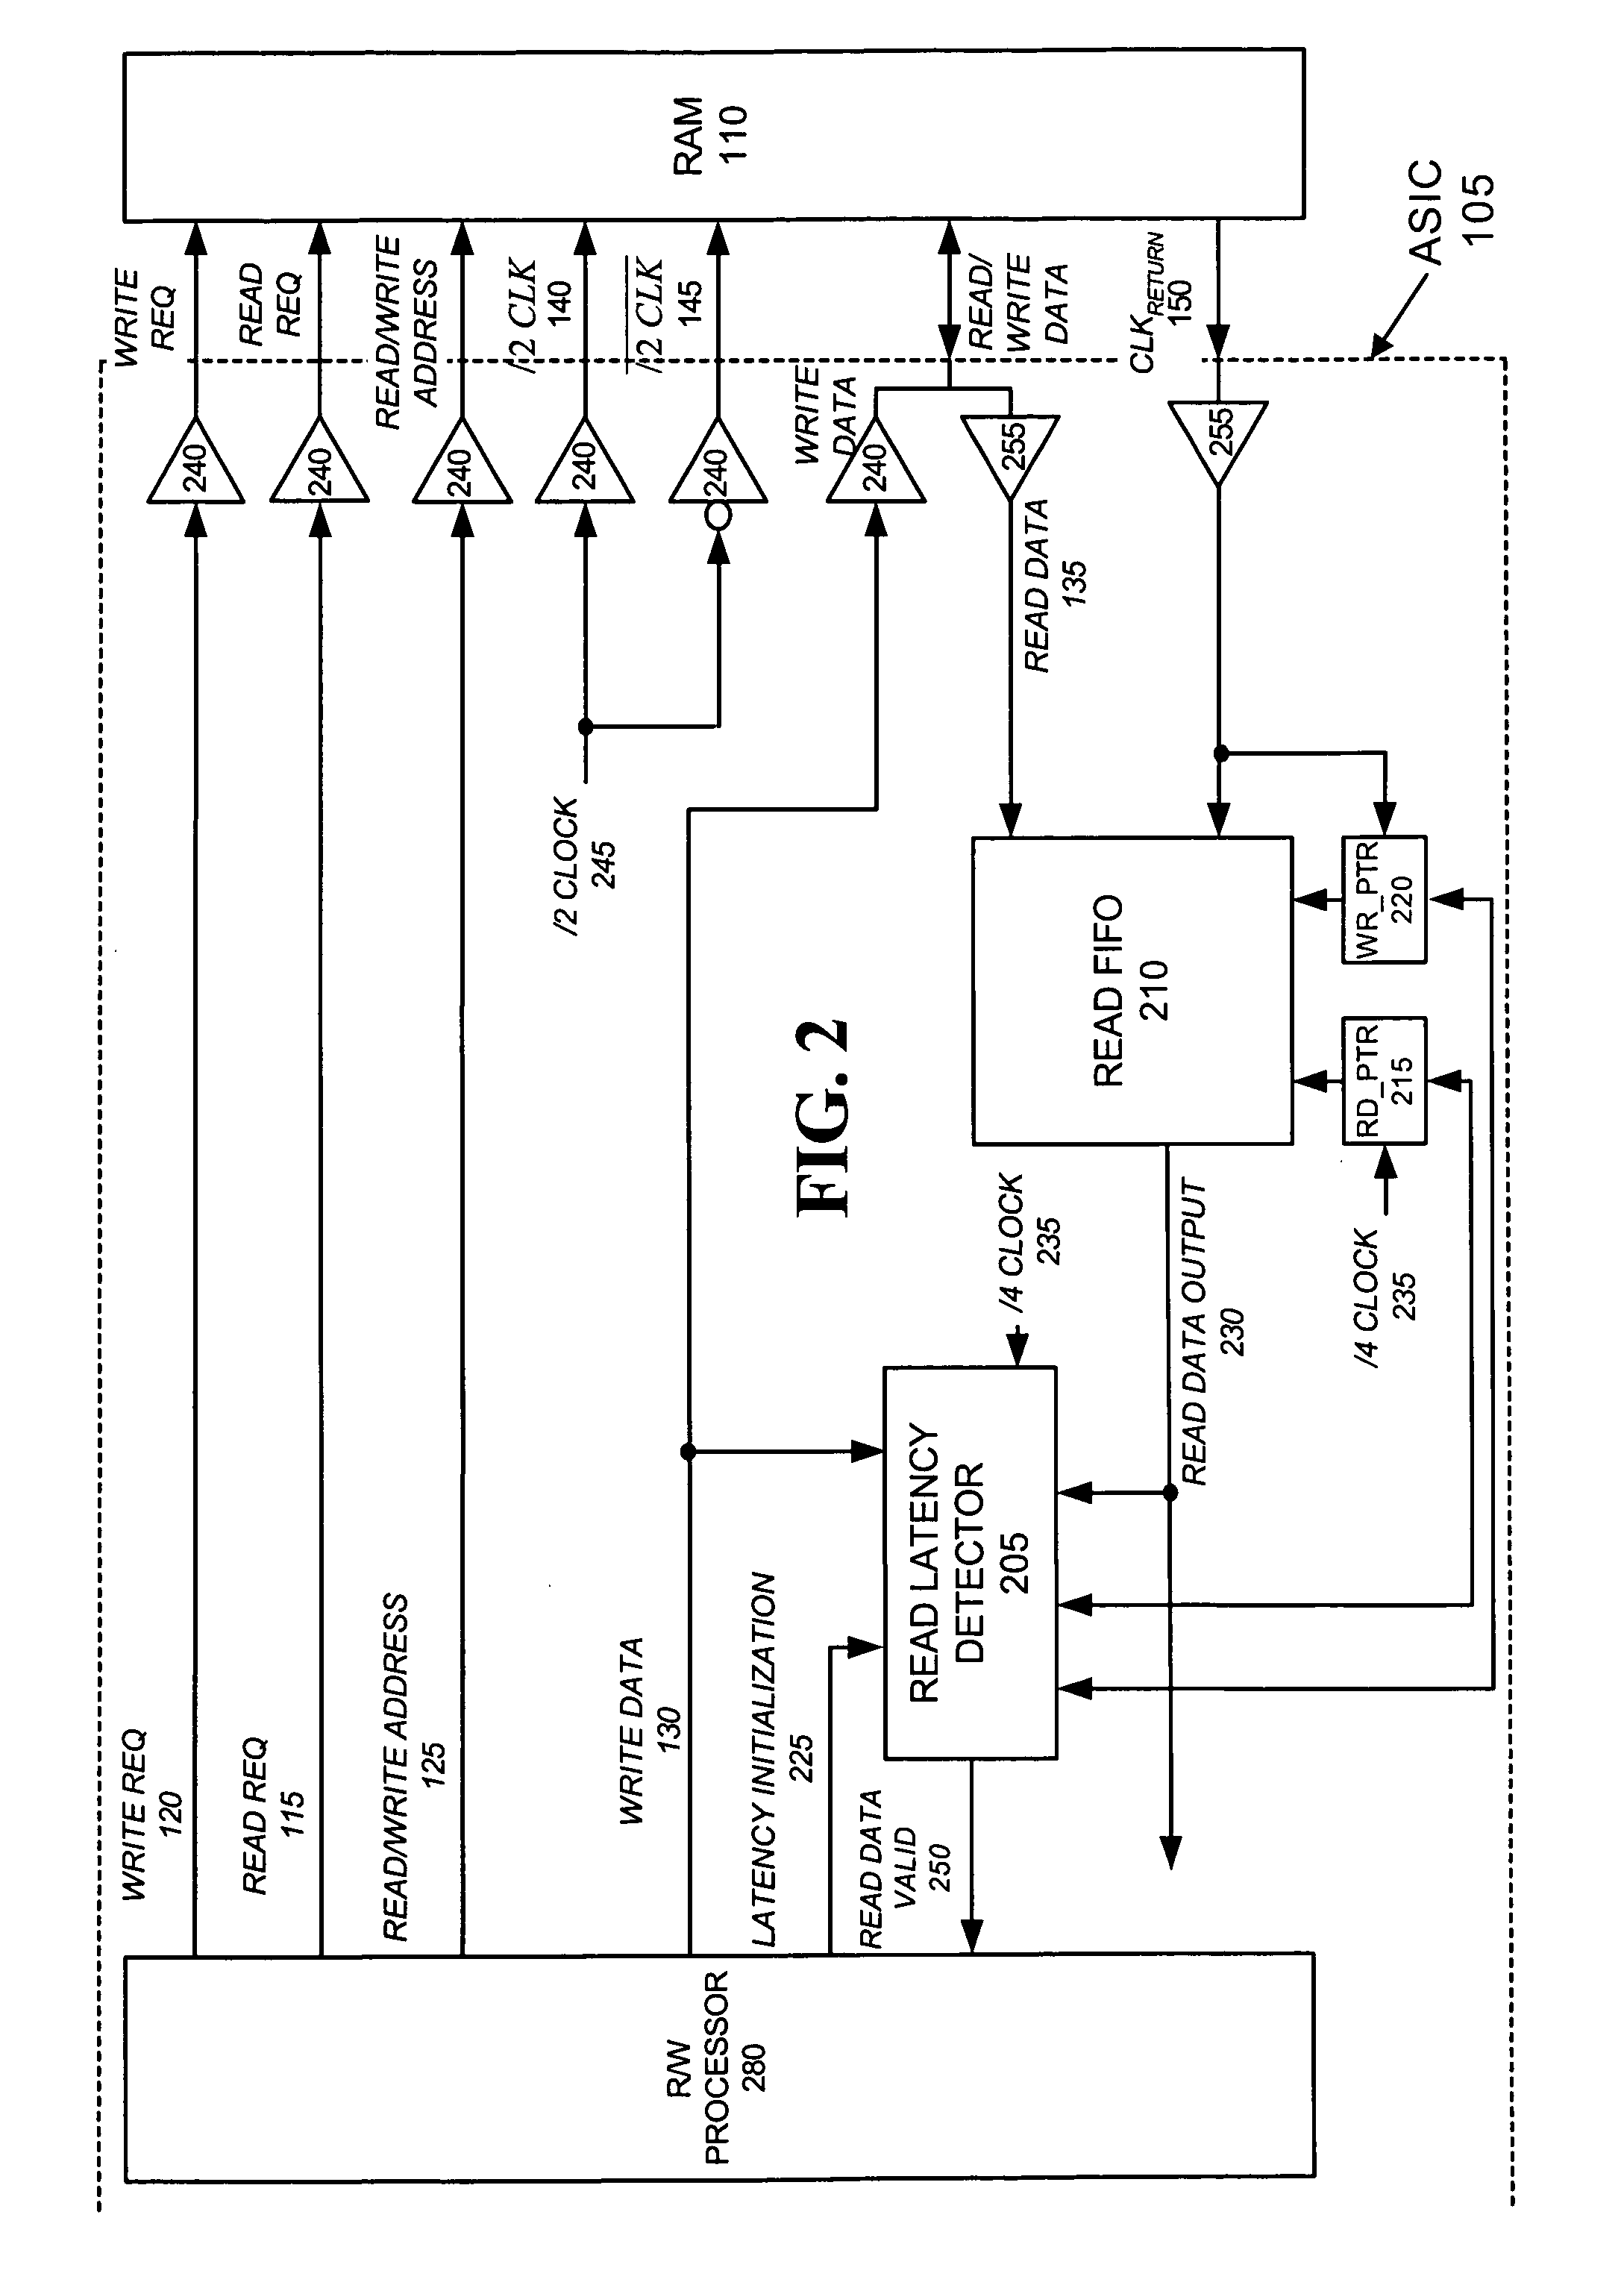 Systems and methods for memory read response latency detection